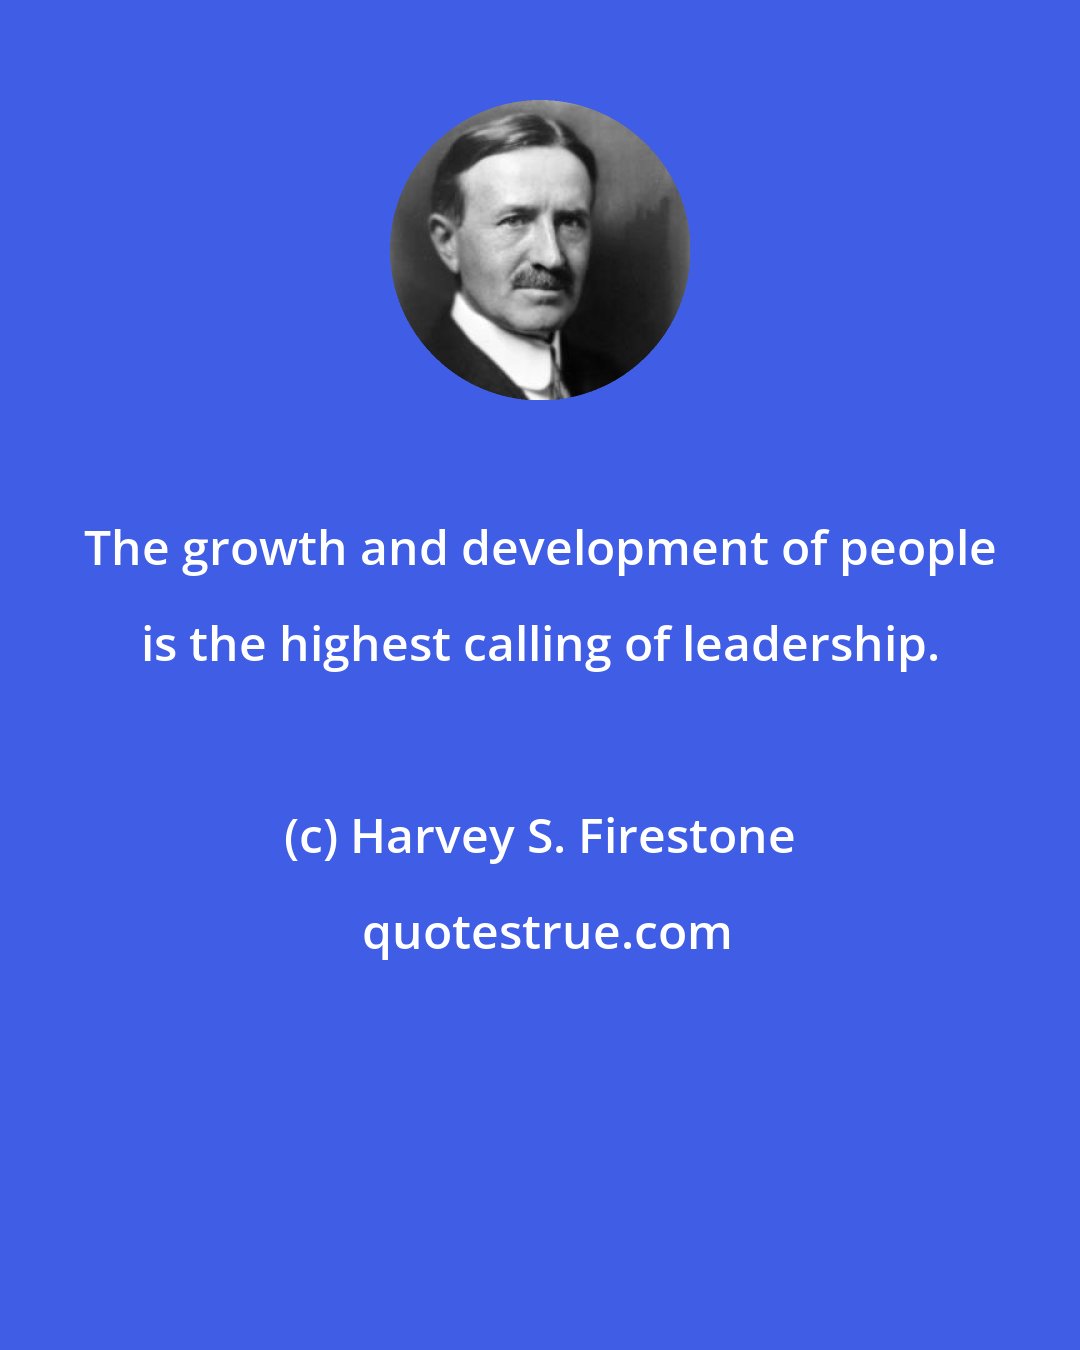 Harvey S. Firestone: The growth and development of people is the highest calling of leadership.